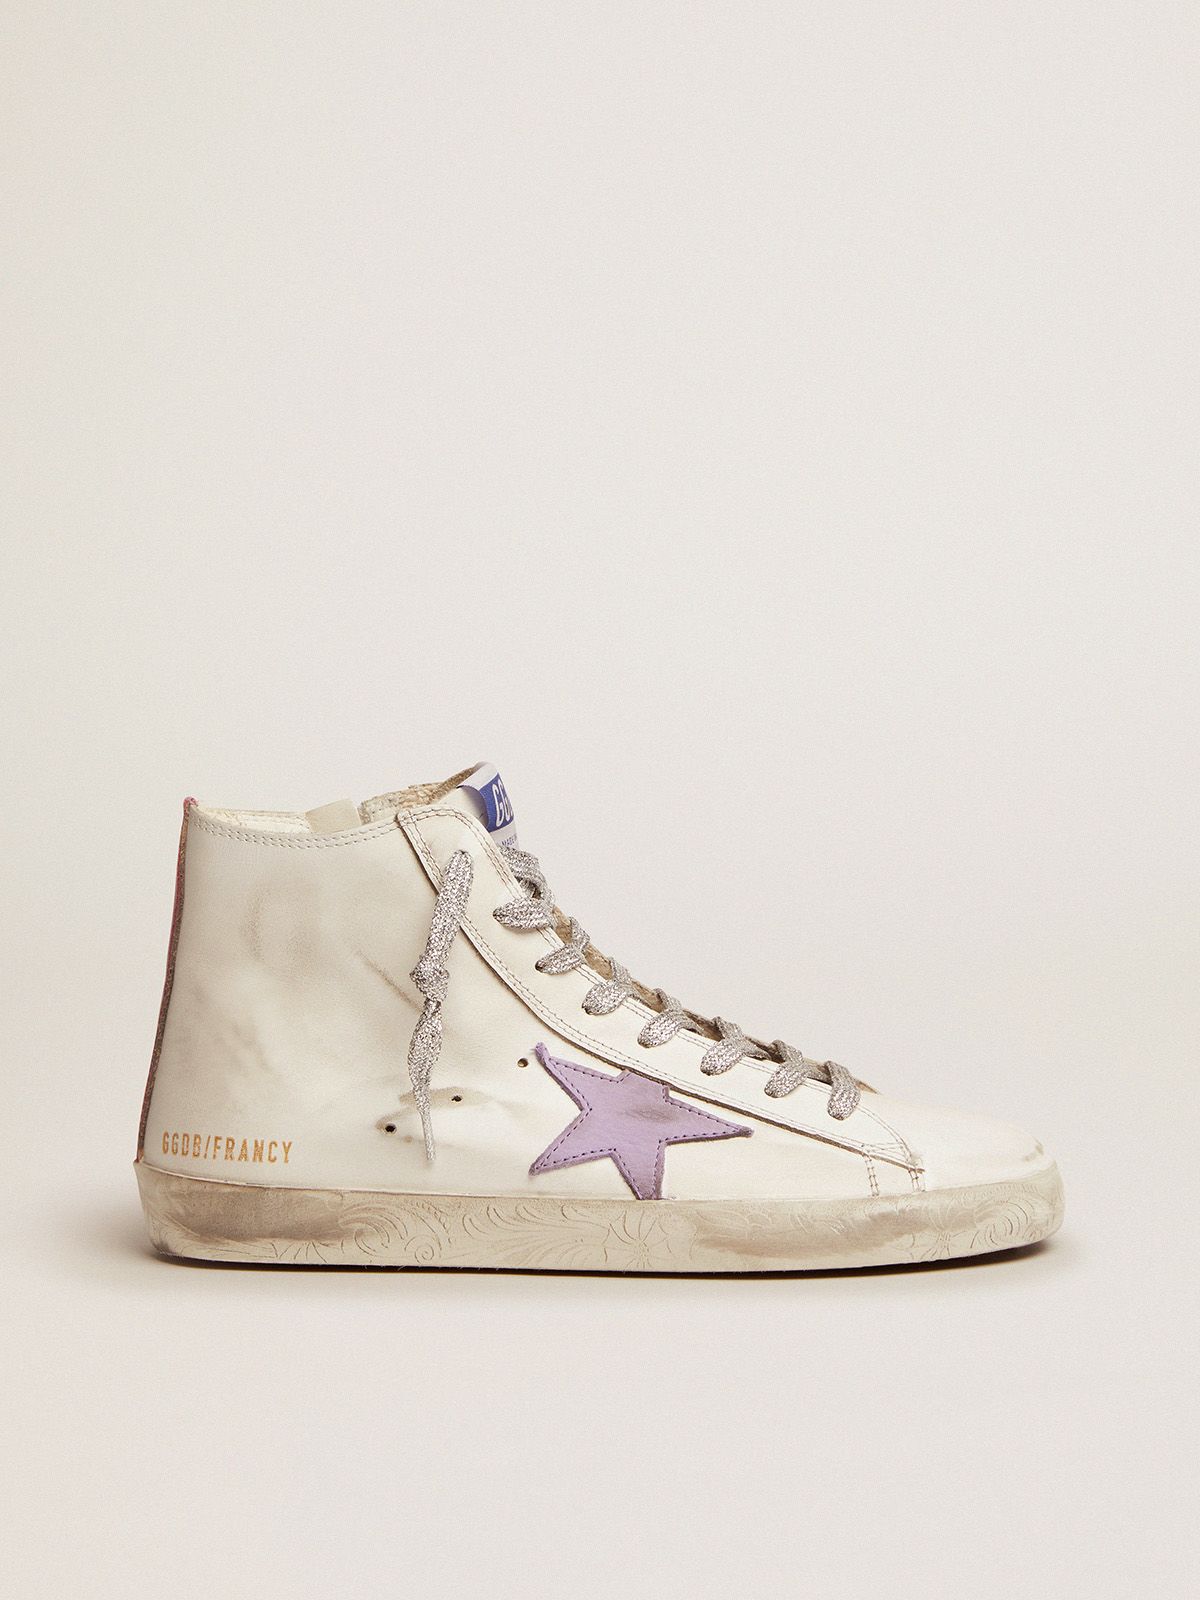 golden goose decorations star Francy floral sneakers lavender-colored with foxing and